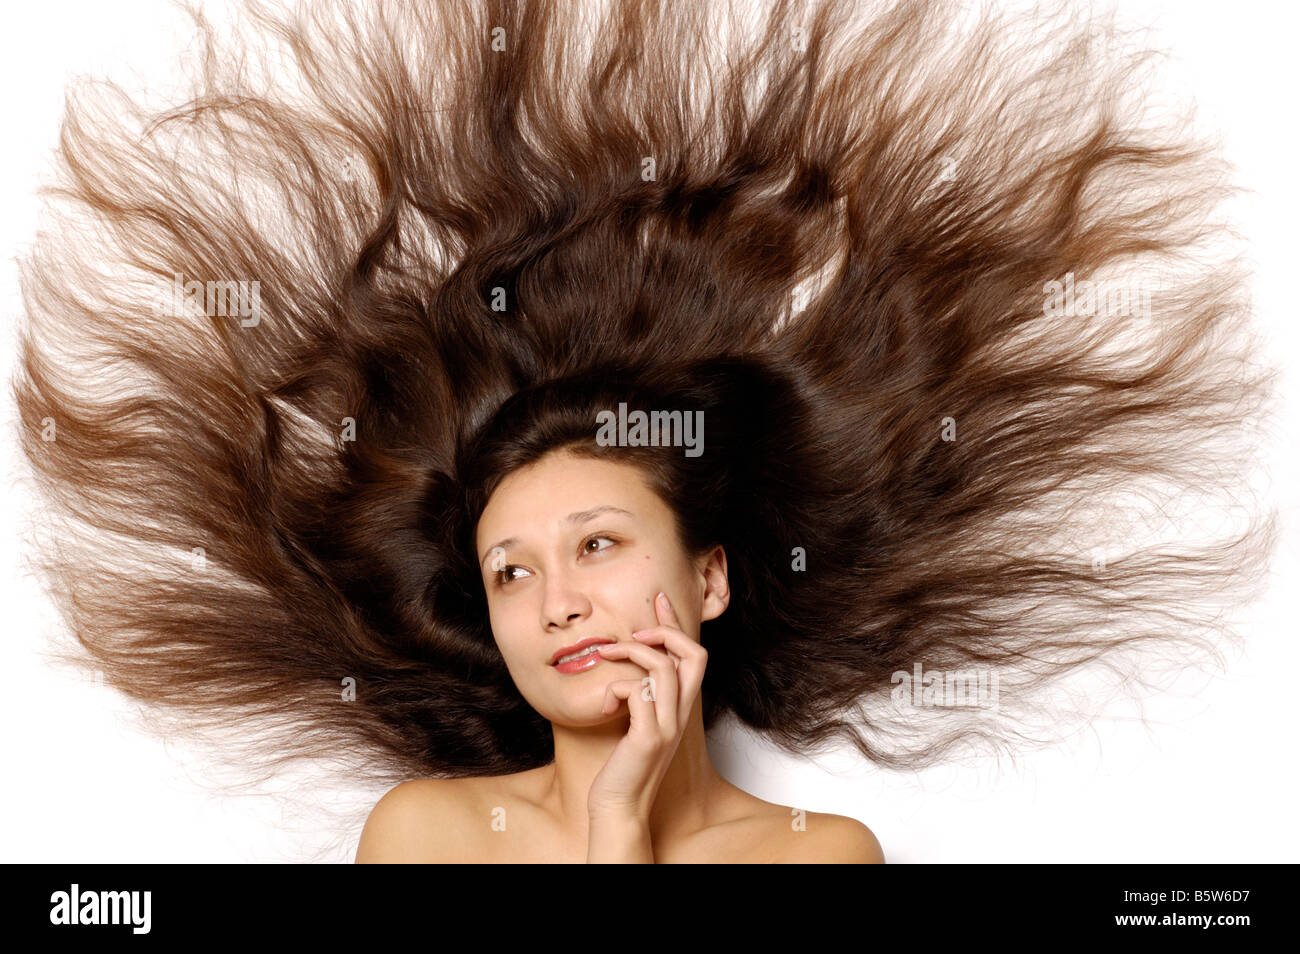 Woman with long hair Stock Photo